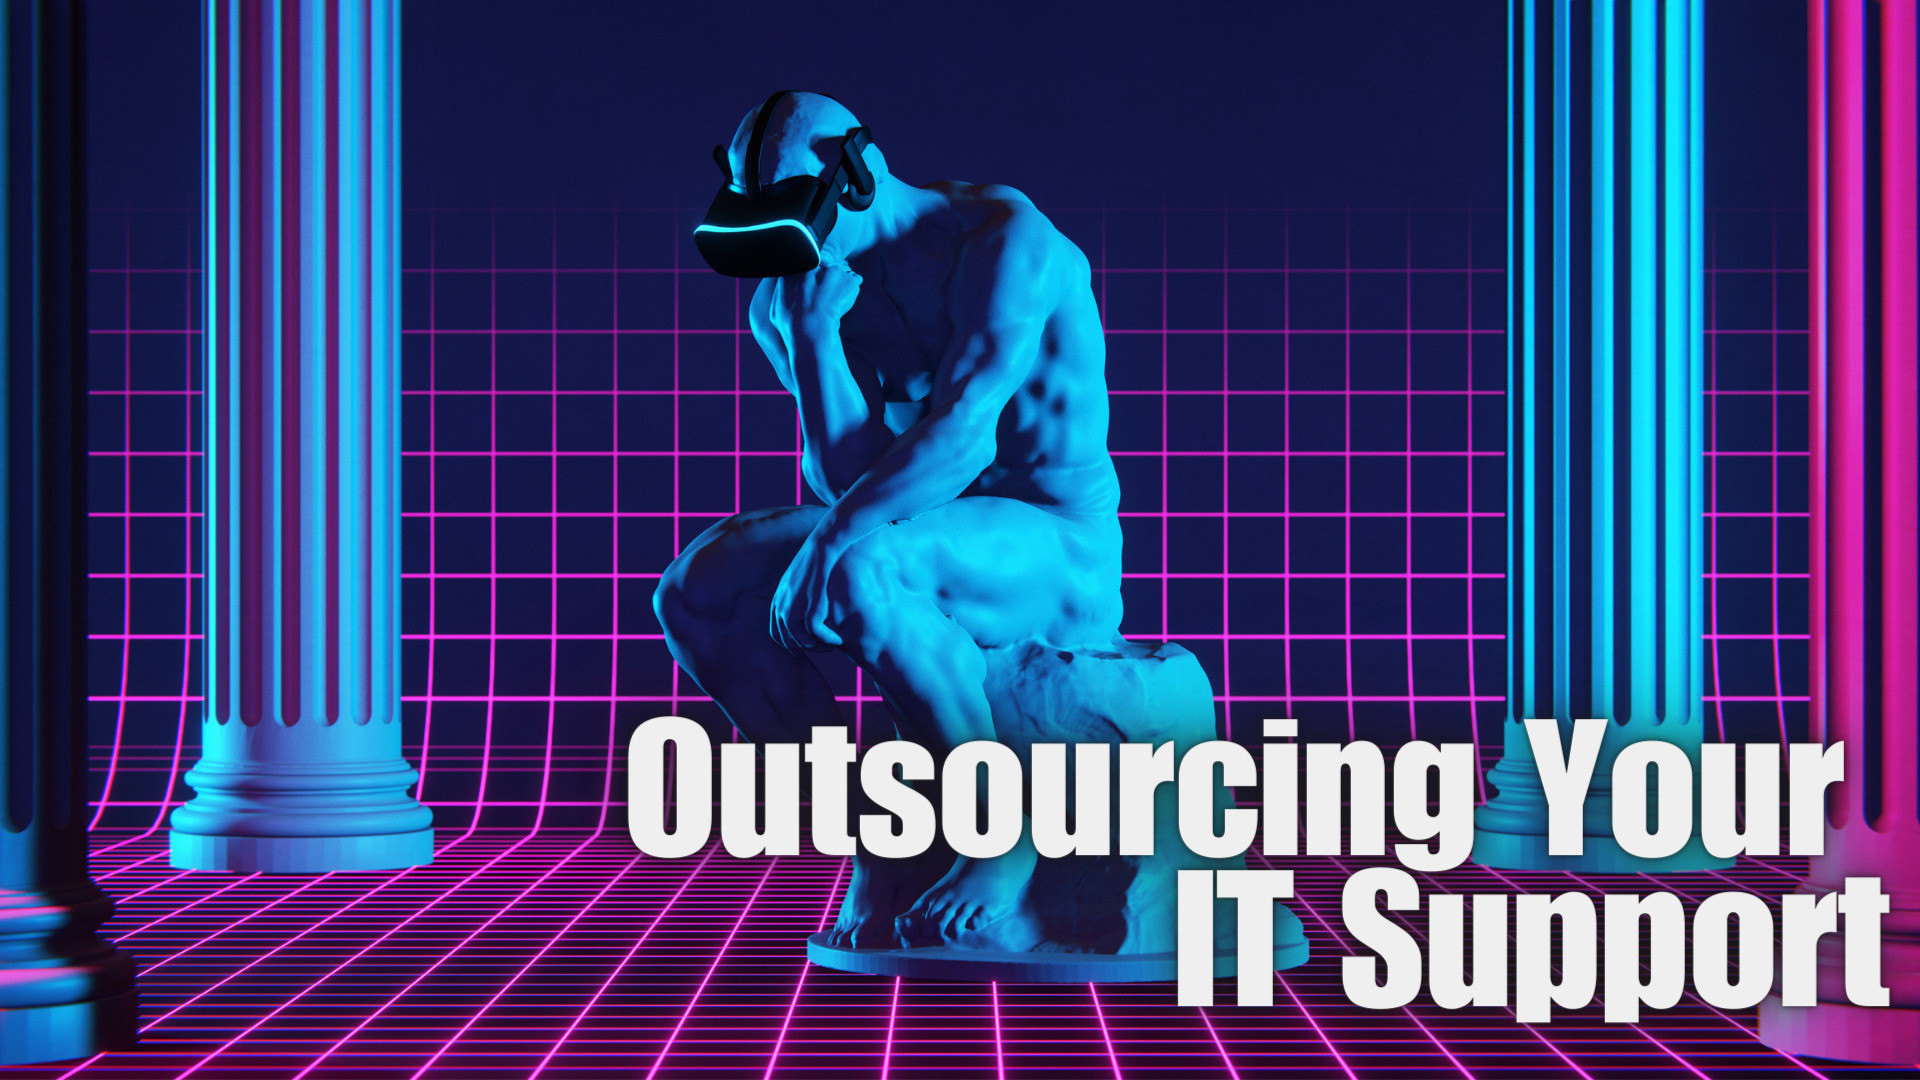 What Are The Top 5 Important Things To Know Before Outsourcing Your IT Support?